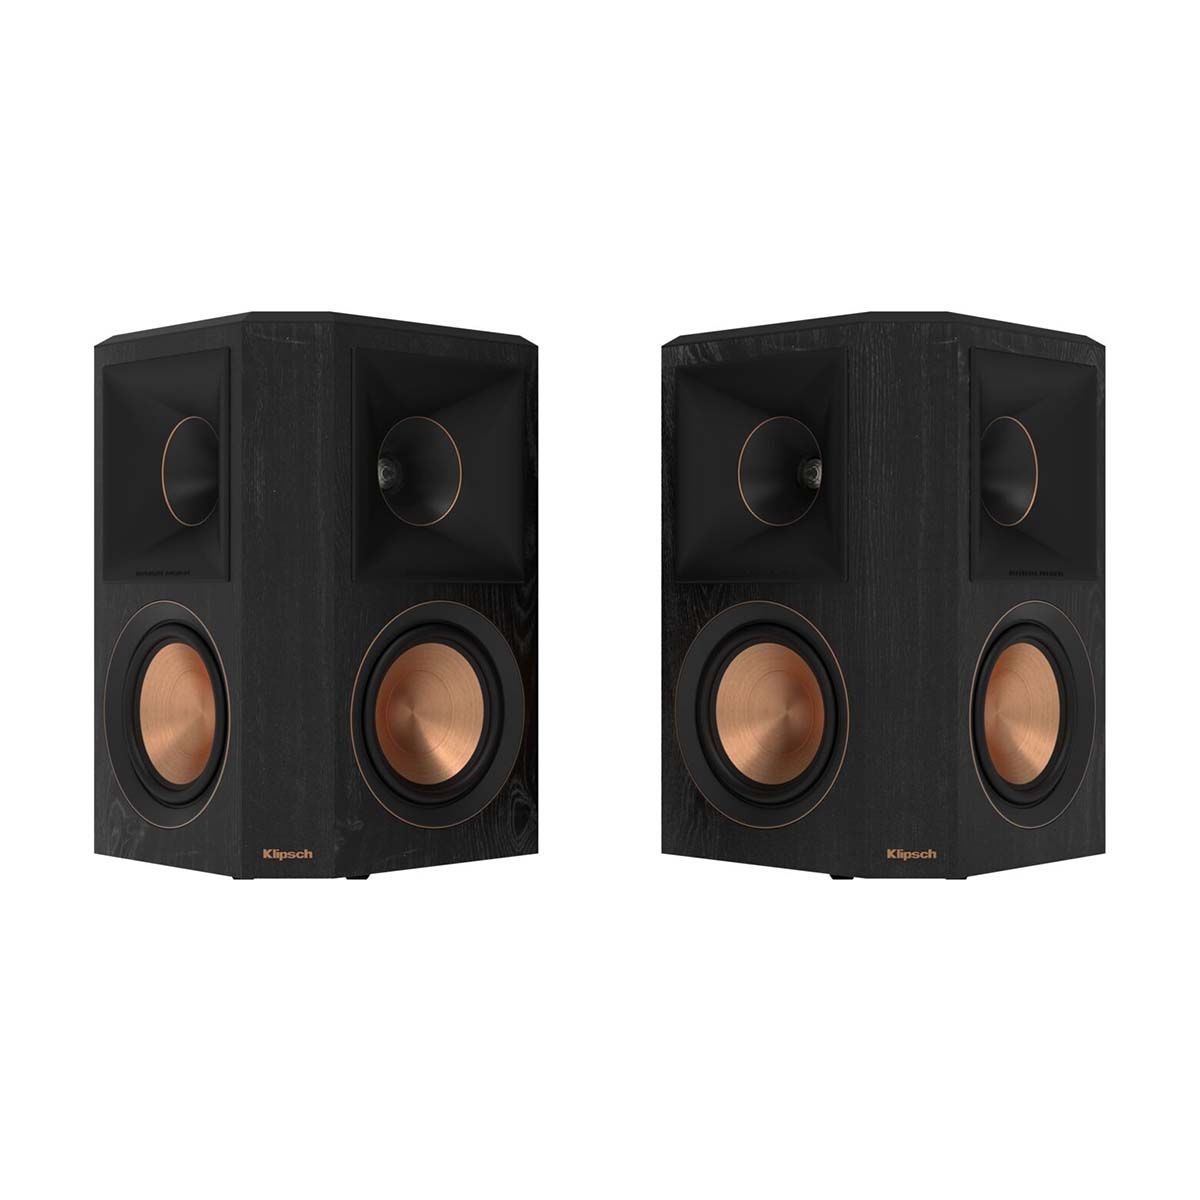 Klipsch RP-502S II Surround Speakers - Ebony - front view of pair without grills